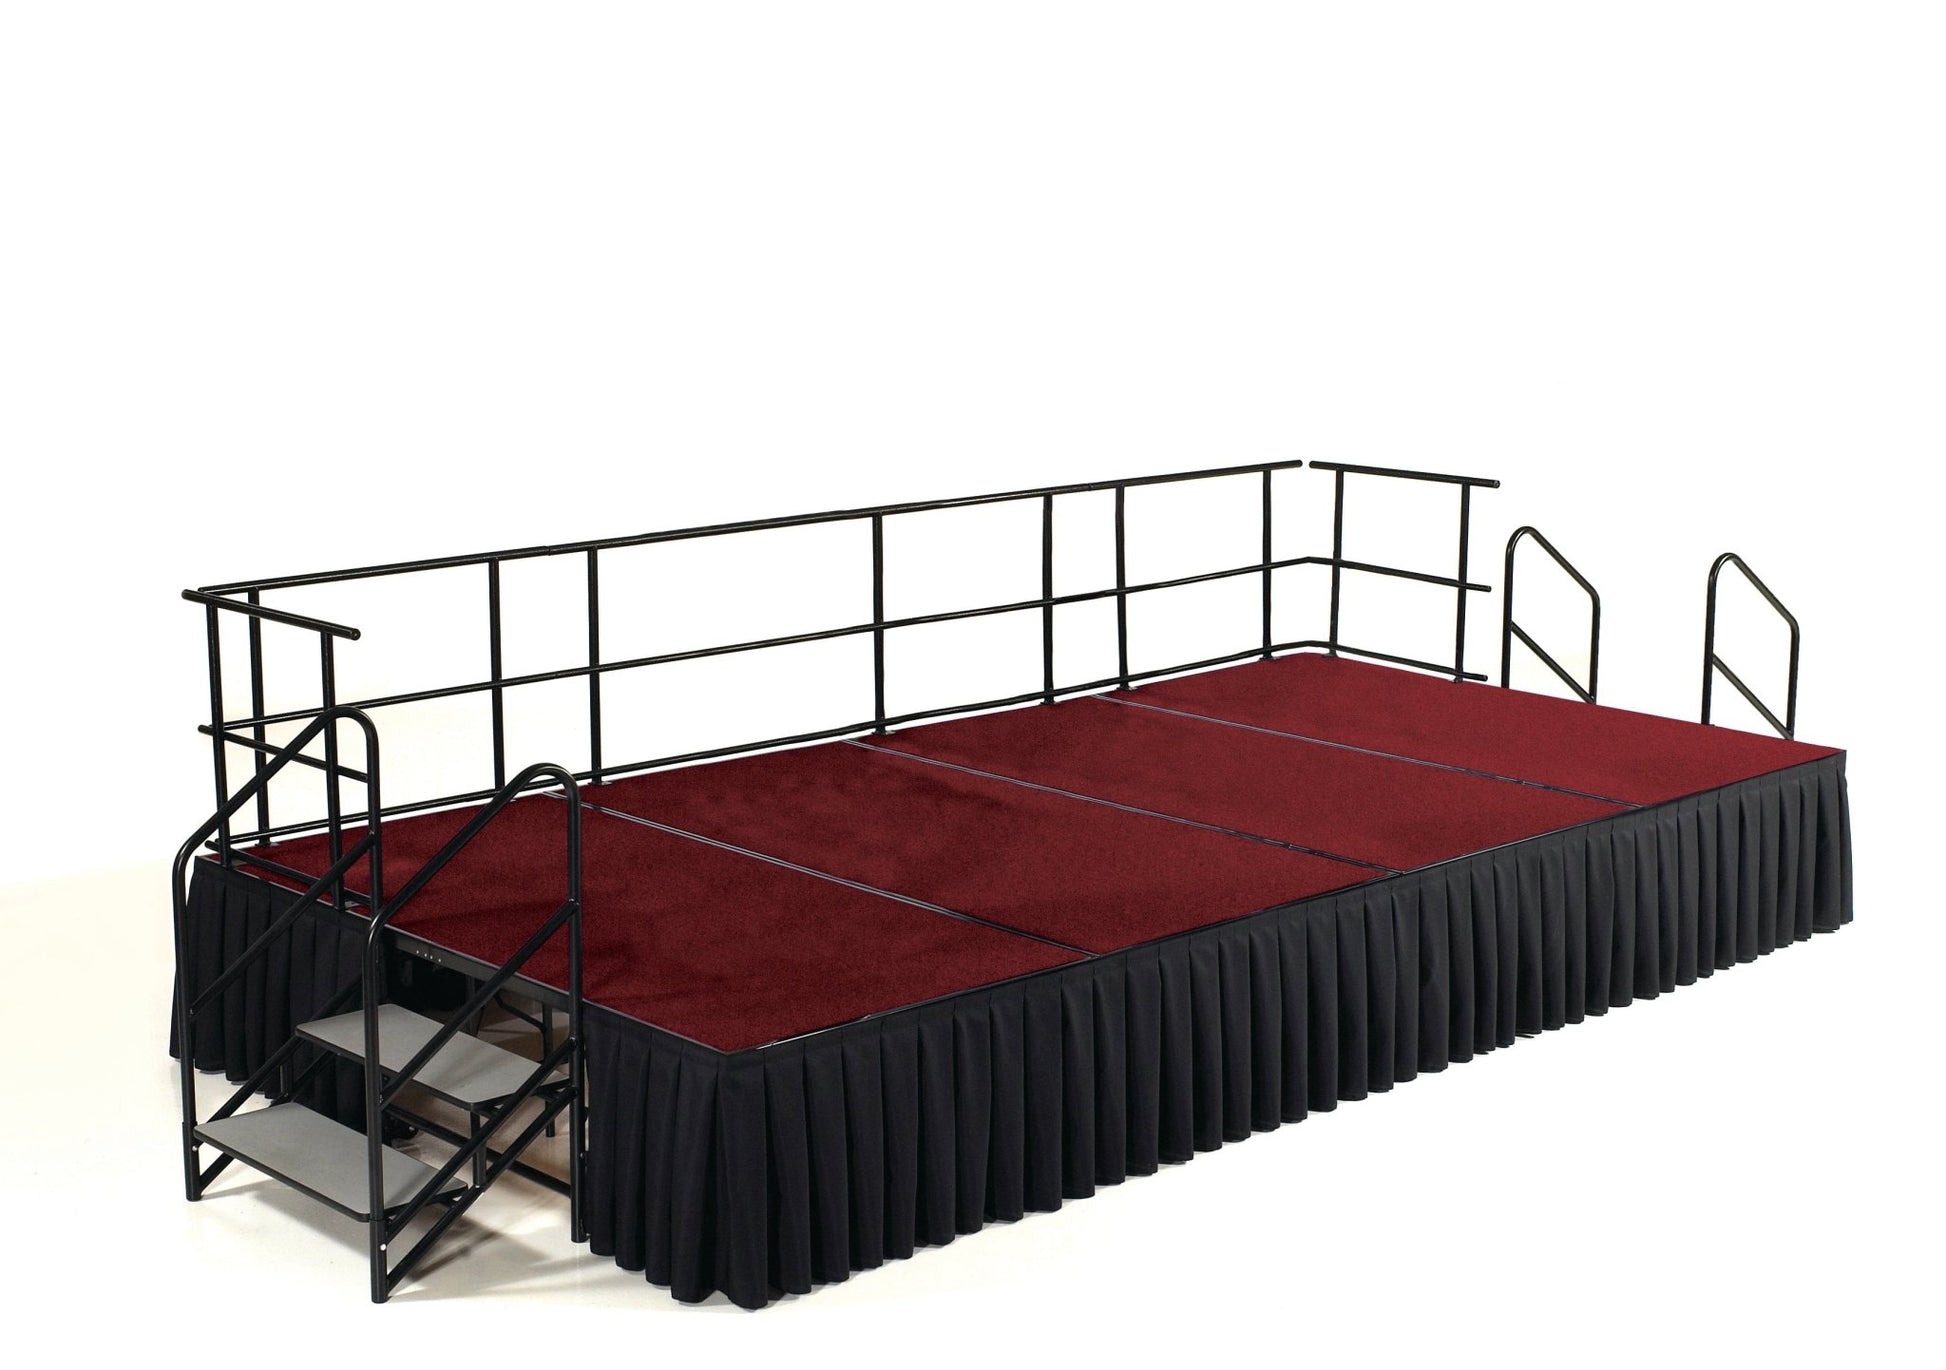 NPS Portable Stage Package w/ Carpeted or Hardboard Surface, 36"W x 24"H x 96"L - Black Box Skirting - SchoolOutlet